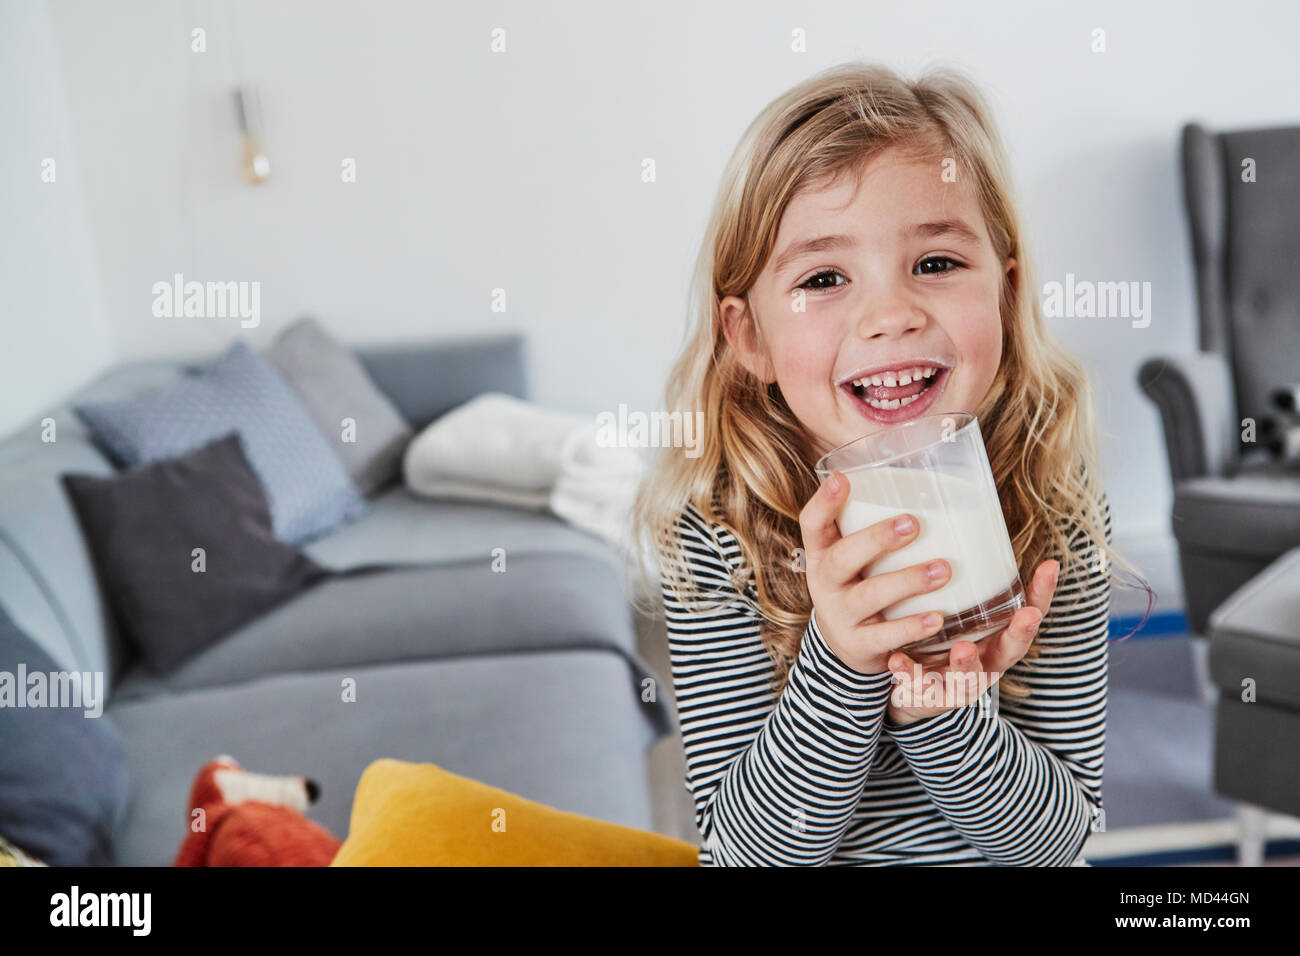 Portrait of young girl sitting in living room, holding glass of milk, smiling Stock Photo